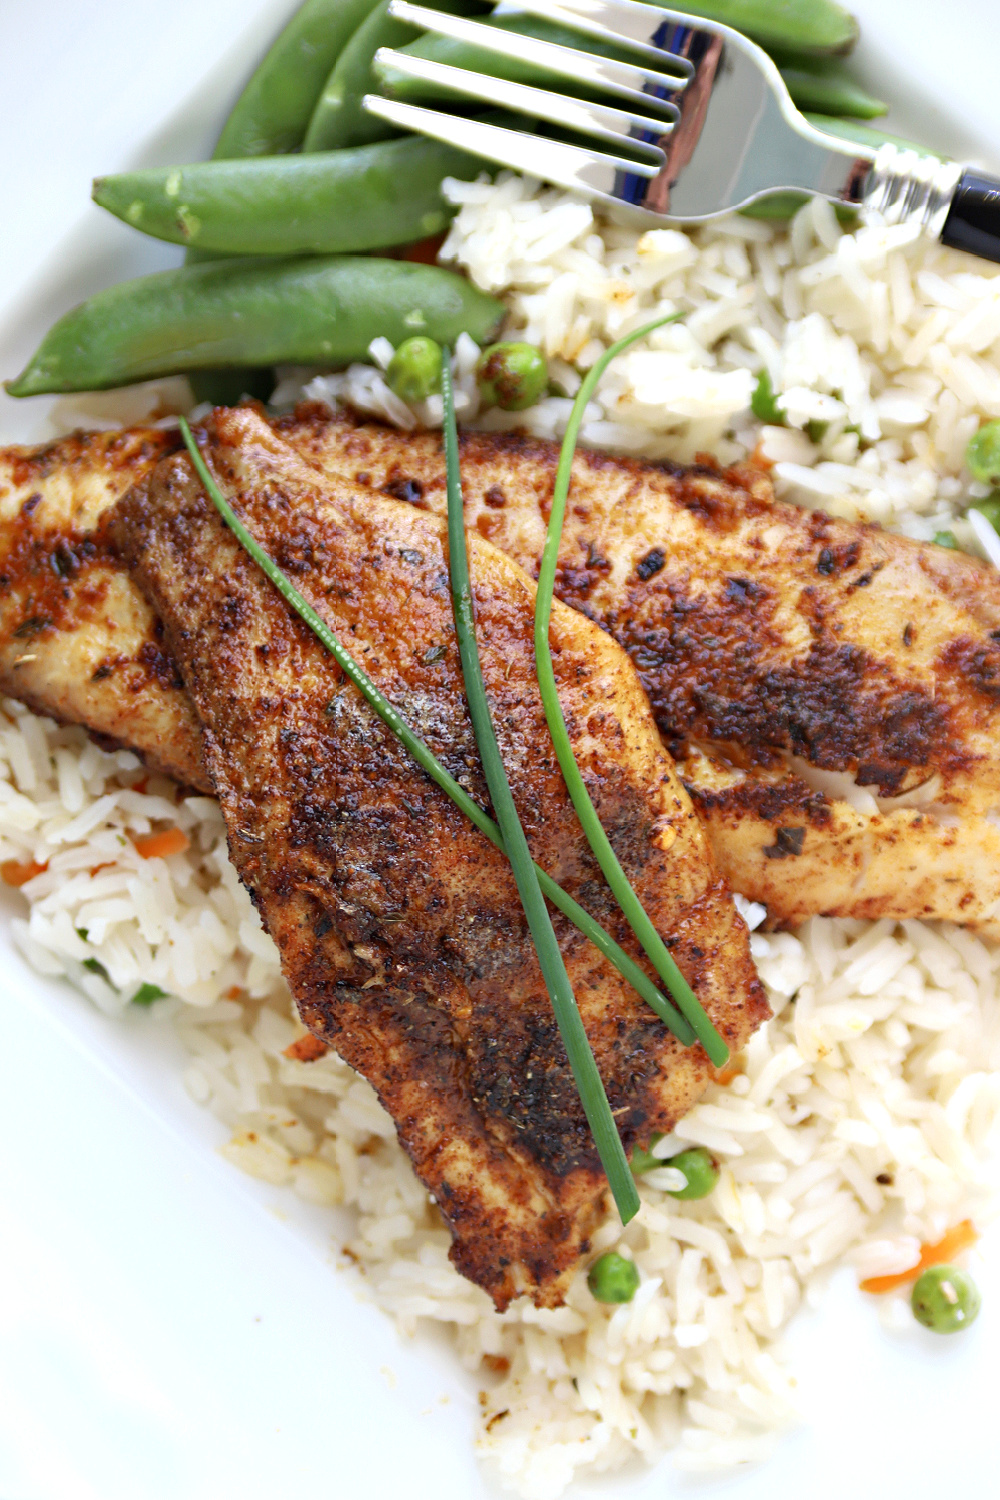 An easy recipe for how to make nutritious fish blackened tilapia cooked in an iron skillet, grill pan or baked with a spice and herb rub. 